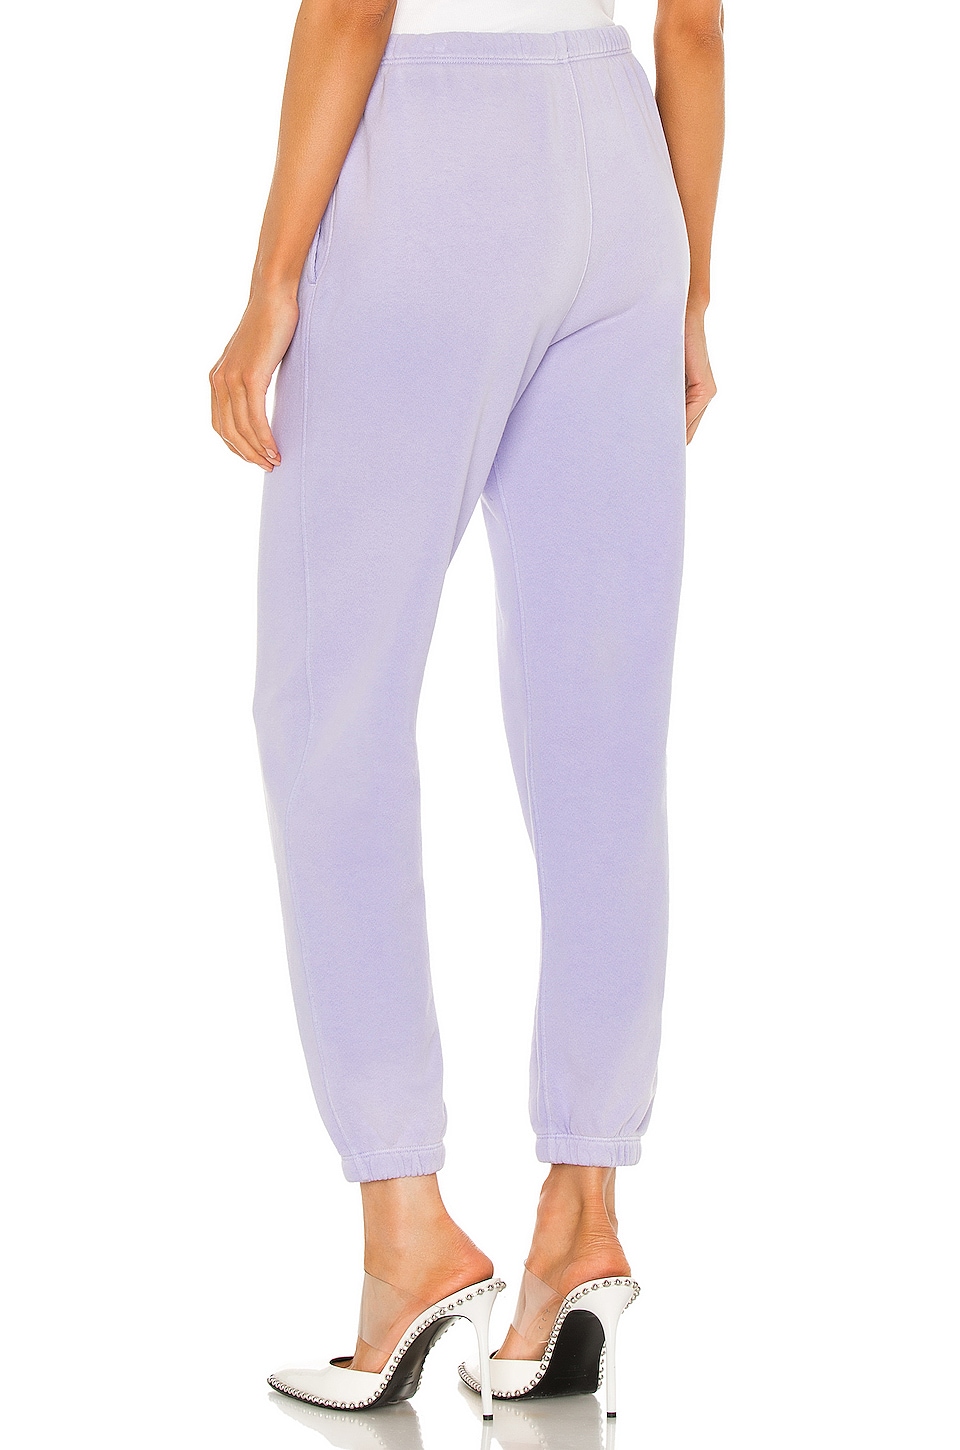 RE/DONE Originals 80s Sweatpant in Faded Orchid | REVOLVE